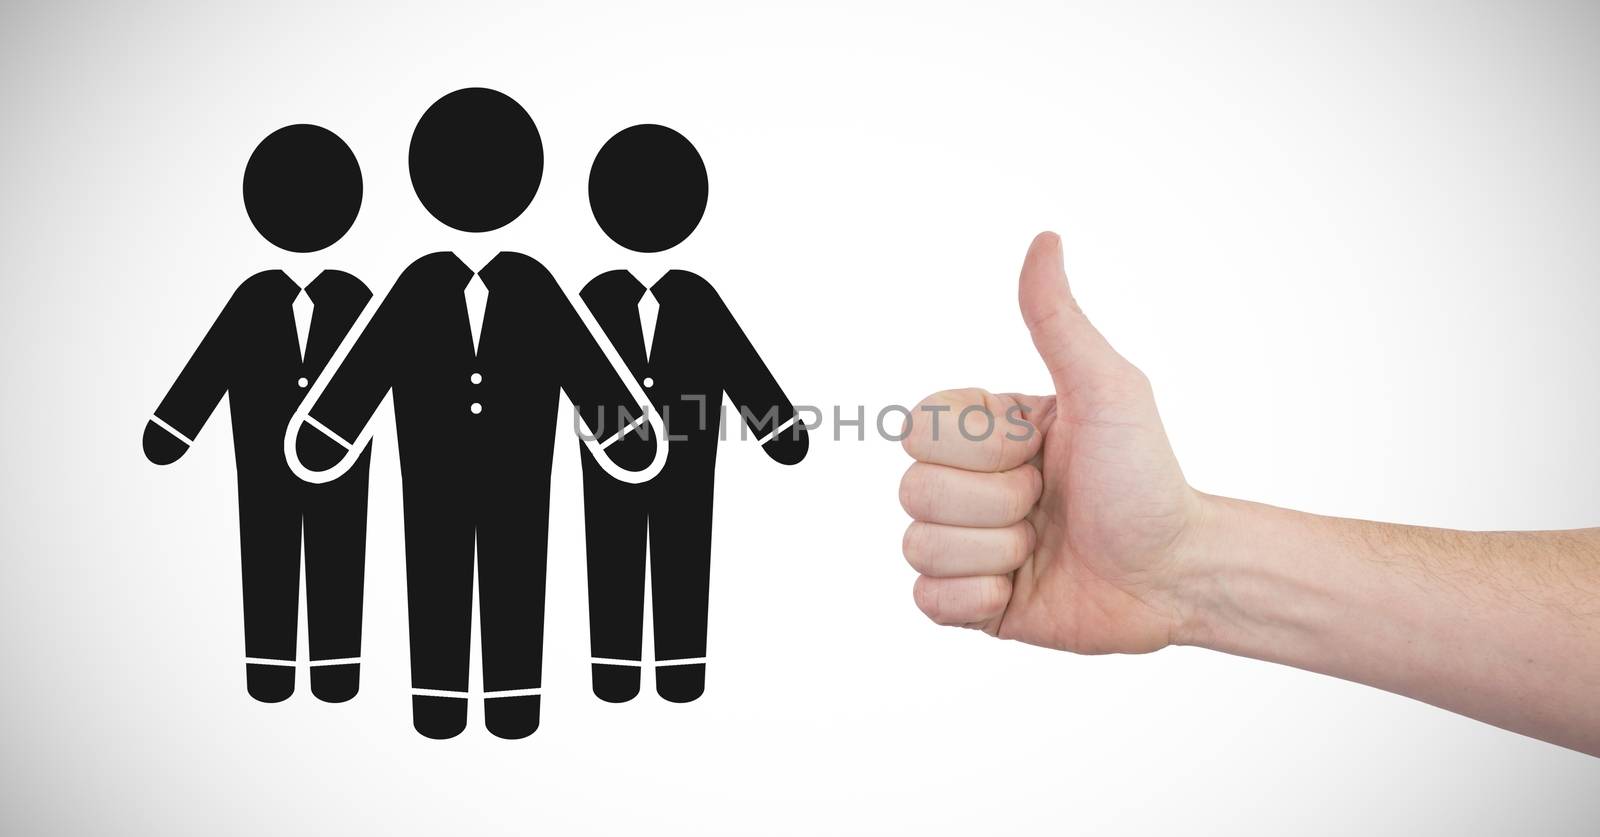 Thumbs up with people group icon by Wavebreakmedia